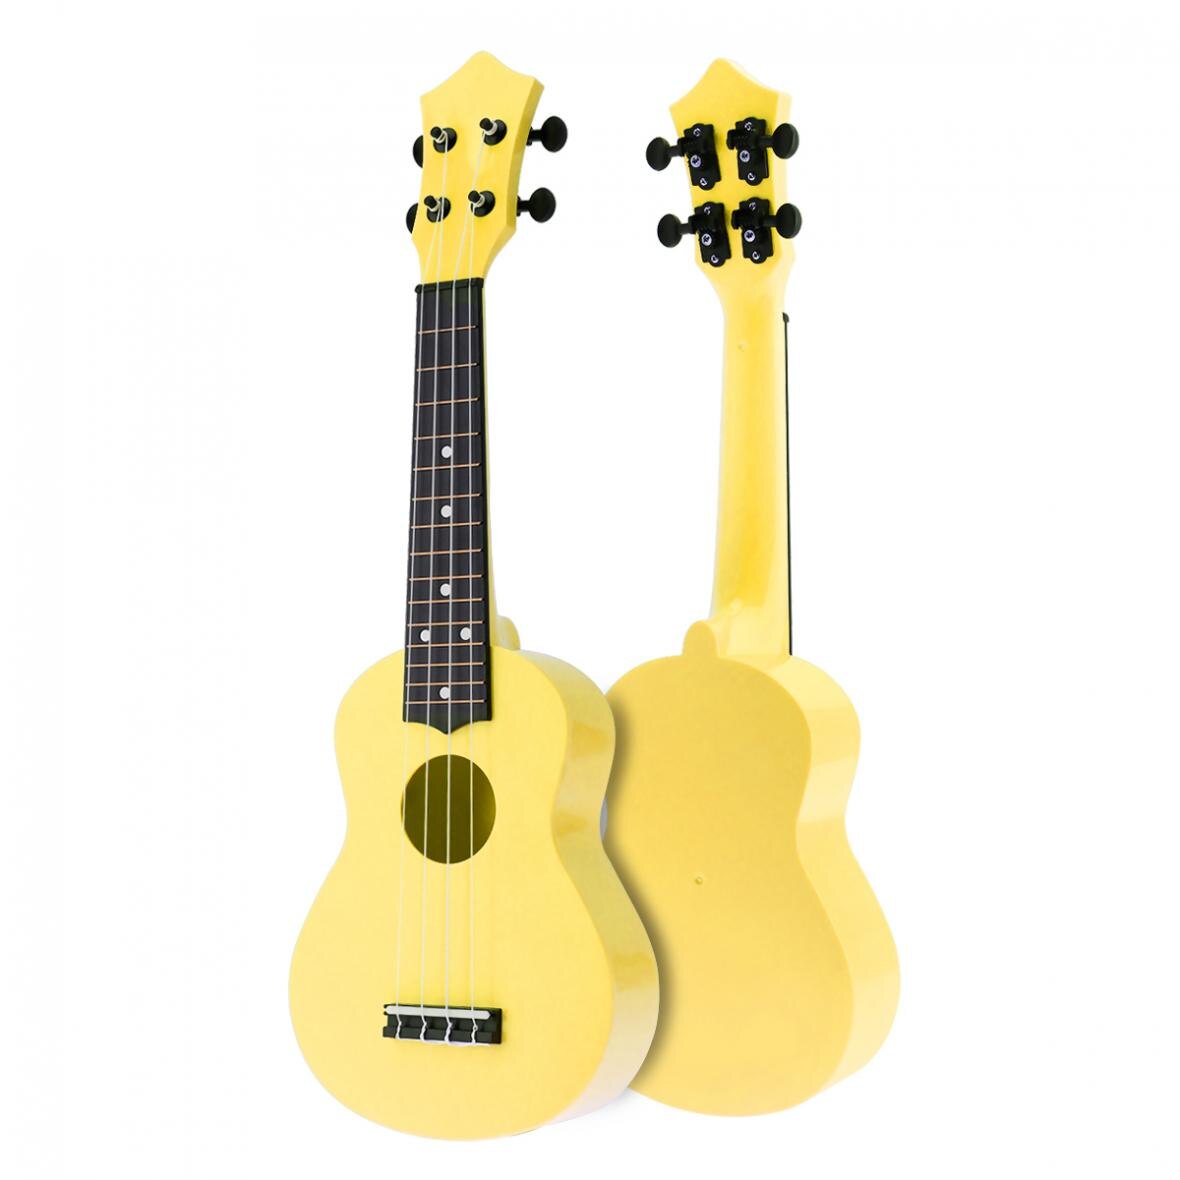 Colorful 21-Inch ABS Ukulele Full Kit for Children and Music Beginners - Acoustic Hawaii Guitar Instrument